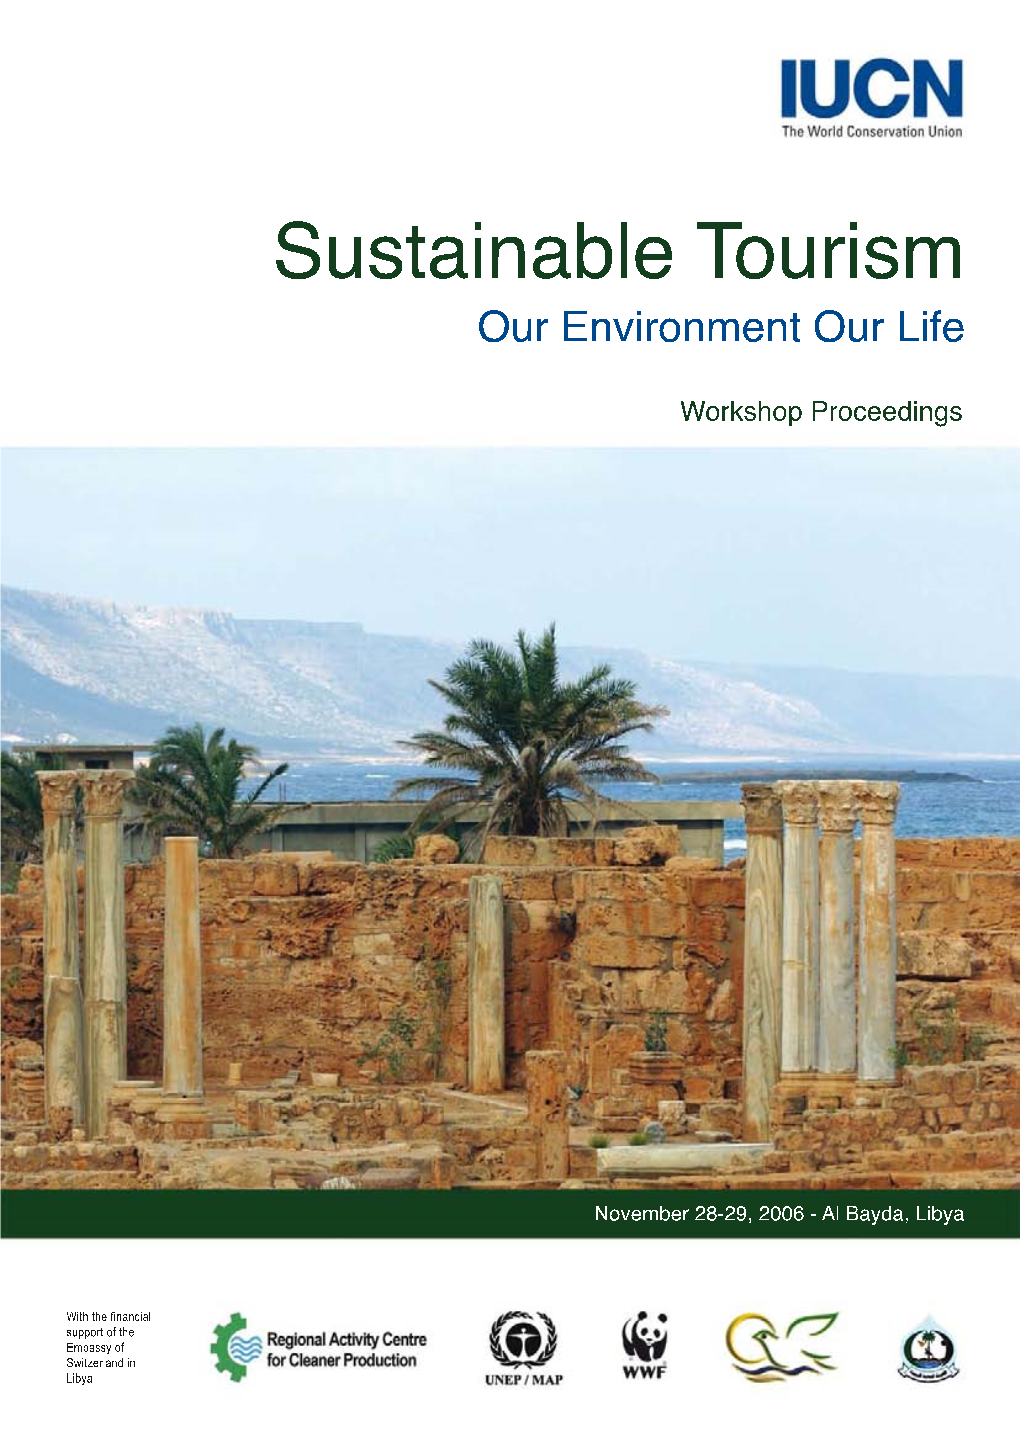 Proceedings of the Workshop on Sustainable Tourism